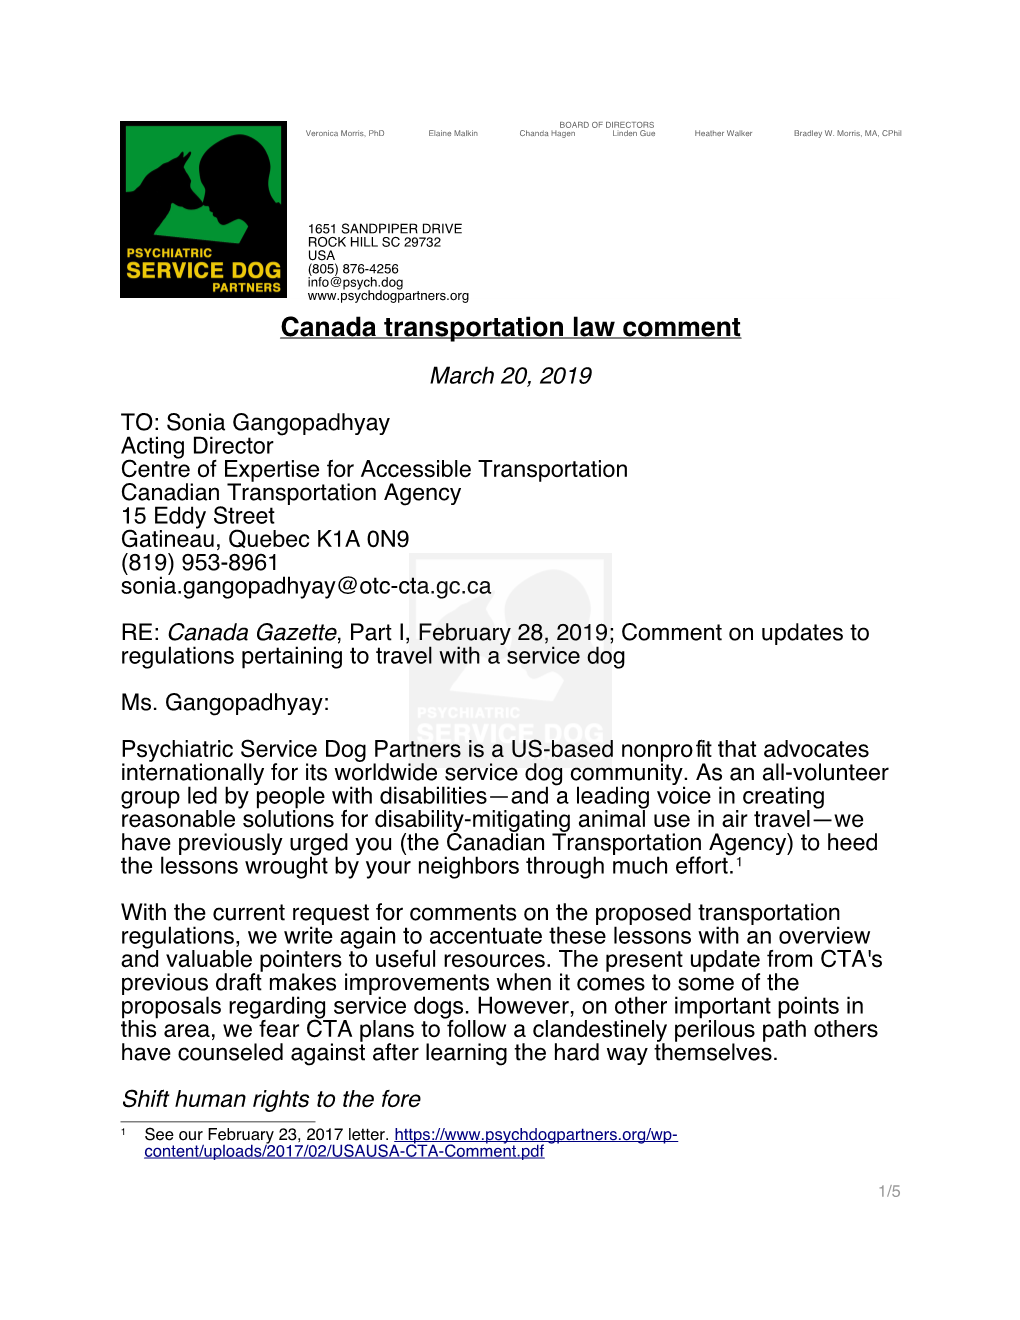 Canada Transportation Law Comment